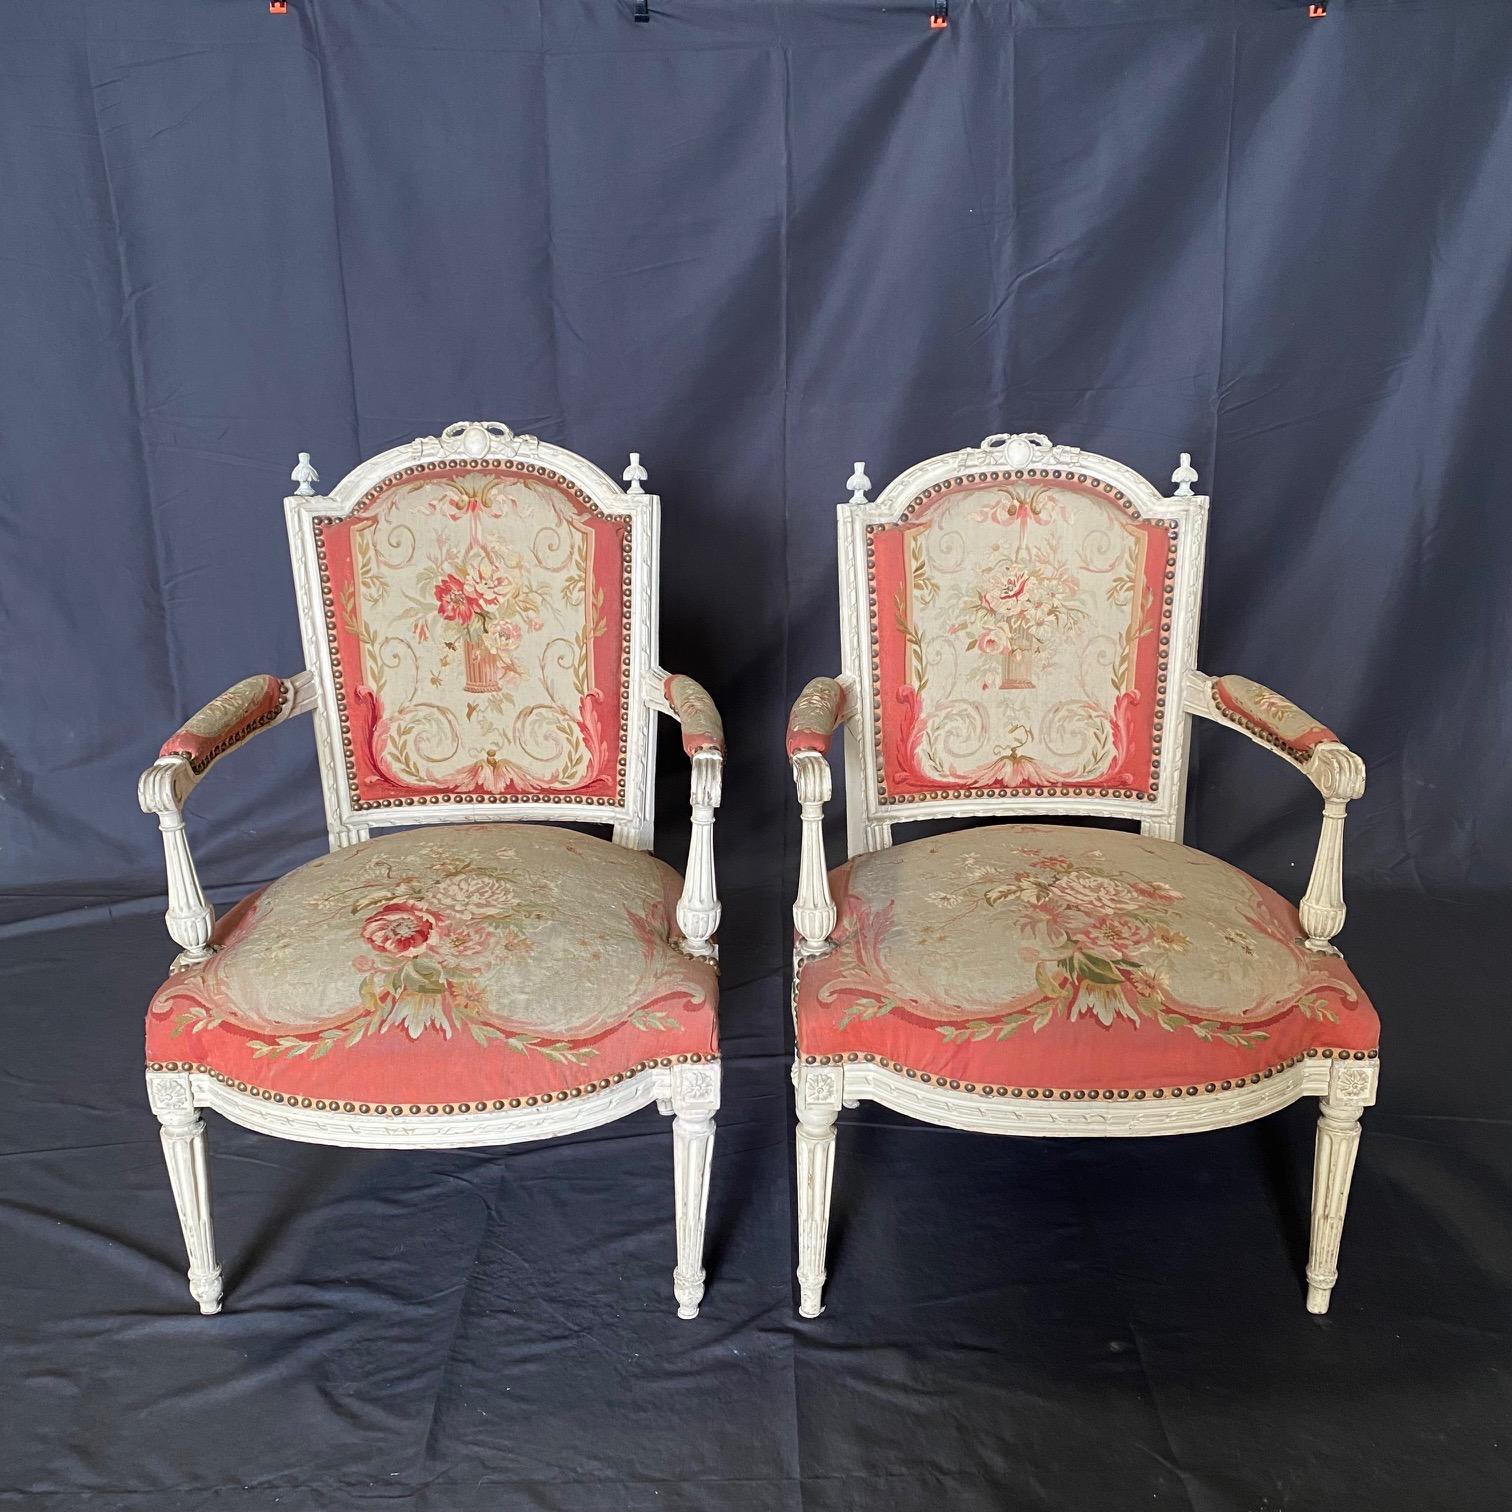 Magnificent Pair of French Aubusson Tapestry and Carved Wood Fauteuil Armchairs For Sale 7